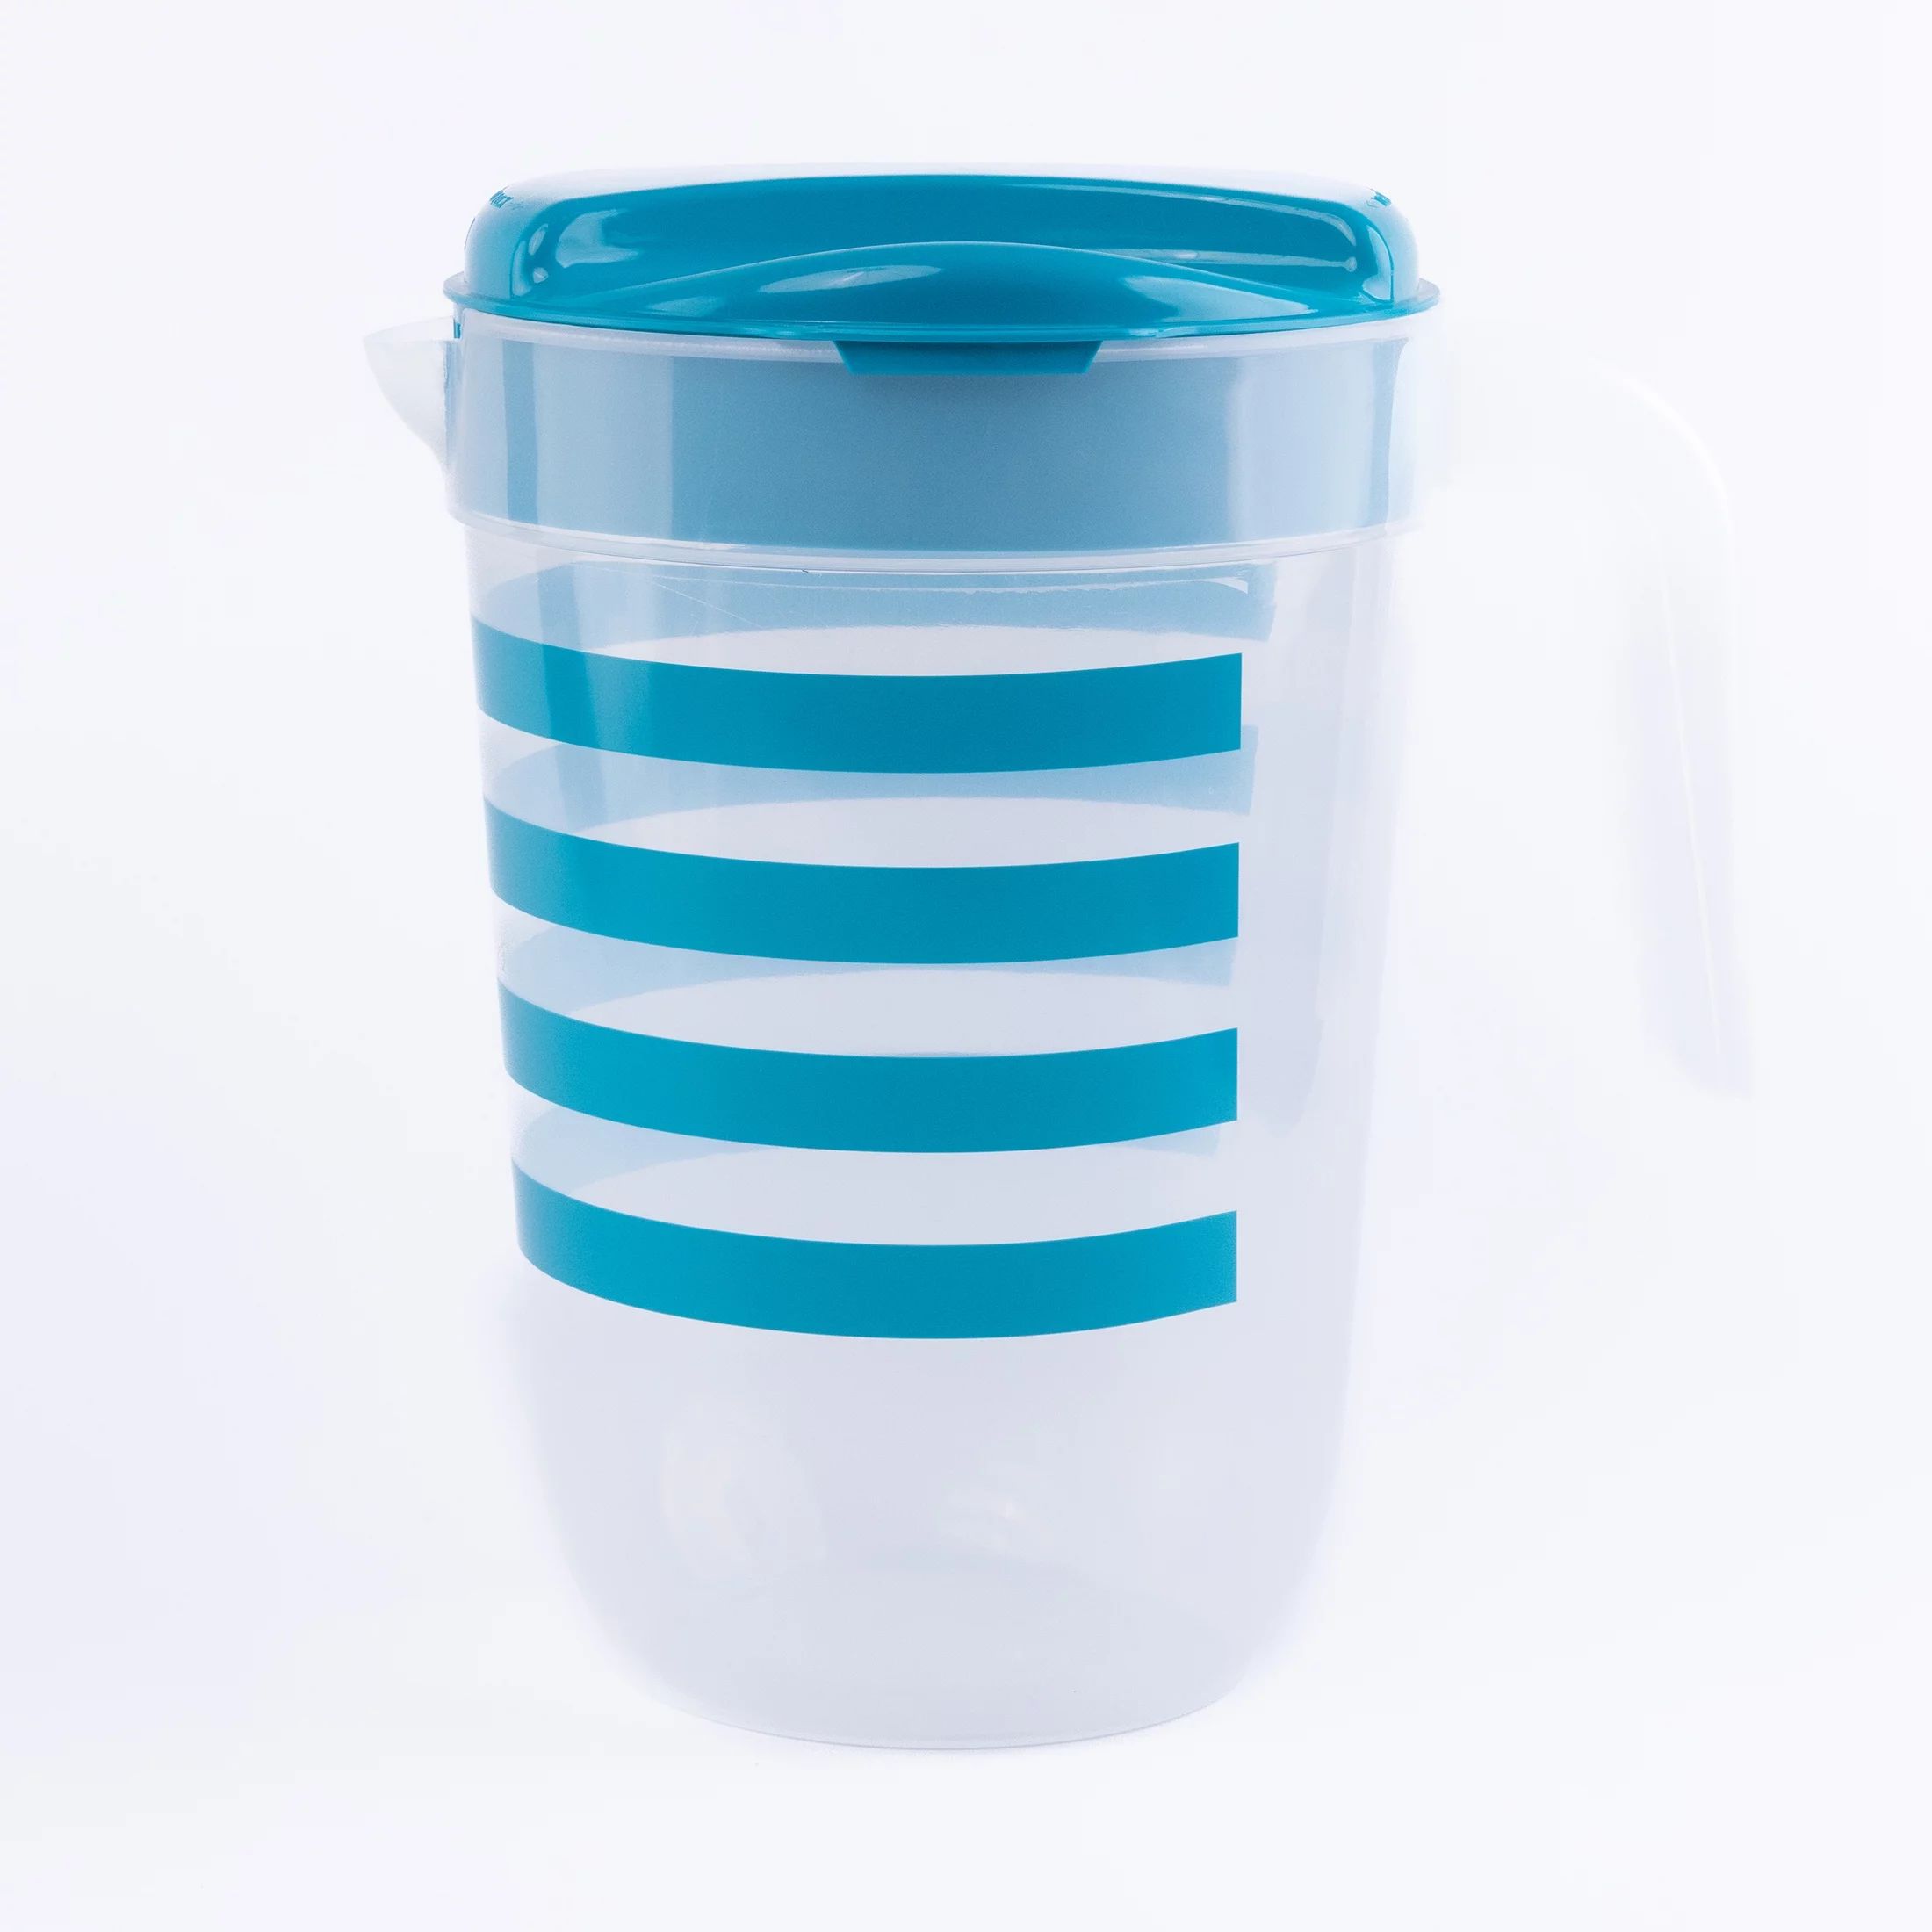 Mainstays Plastic 1 Gallon Pitcher with Green Color Lid – Teal Stripes | Walmart (US)